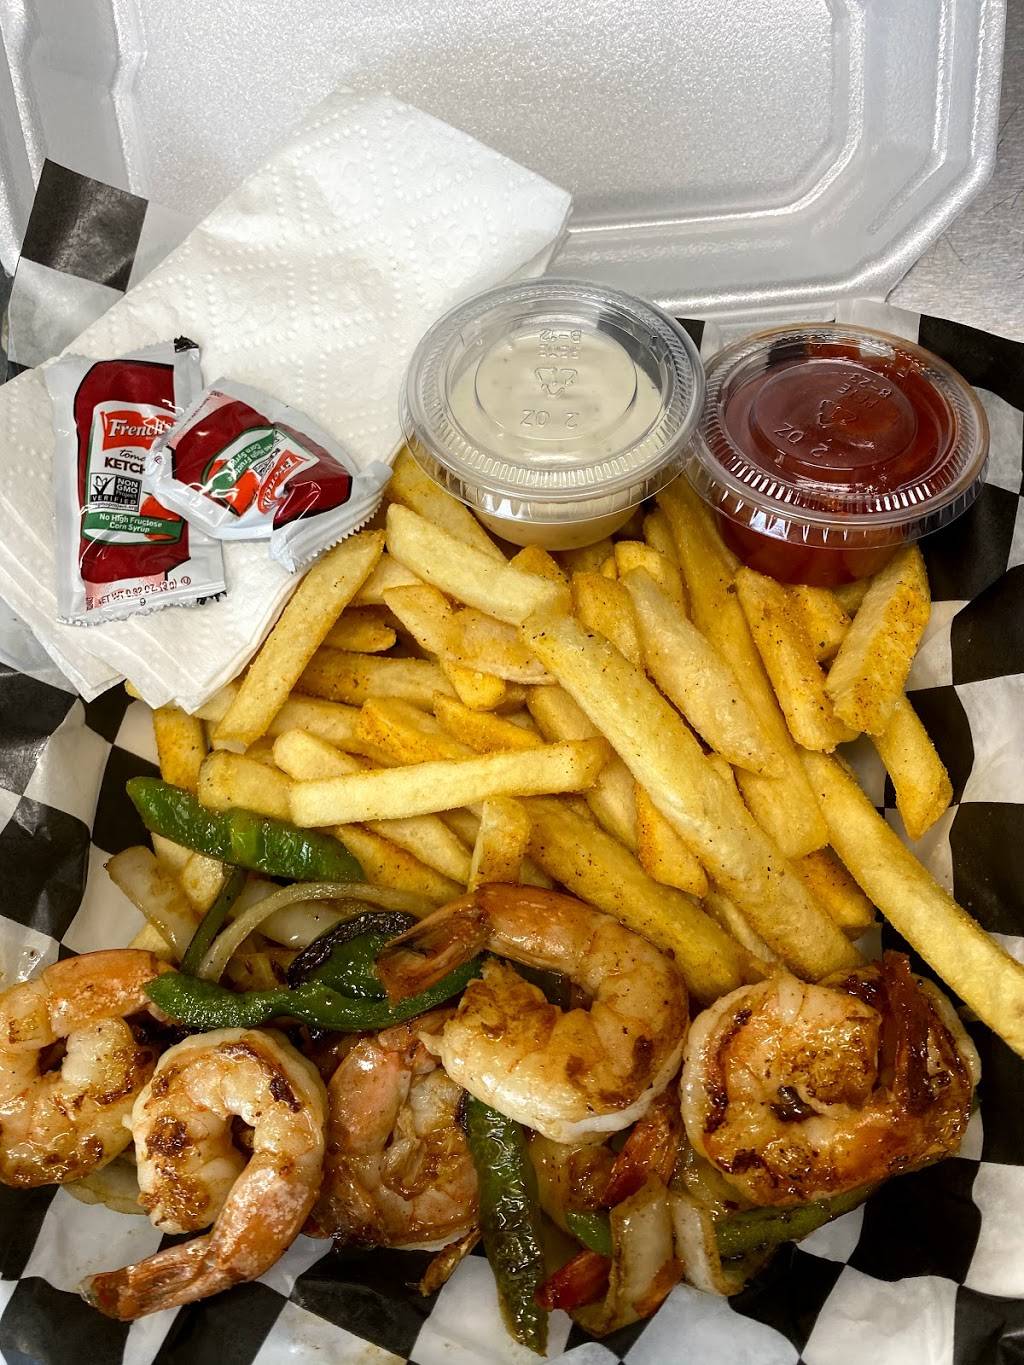 Simmz Kitchen Food Truck | 9834 Linares Dr, Houston, TX 77078 | Phone: (346) 718-9206